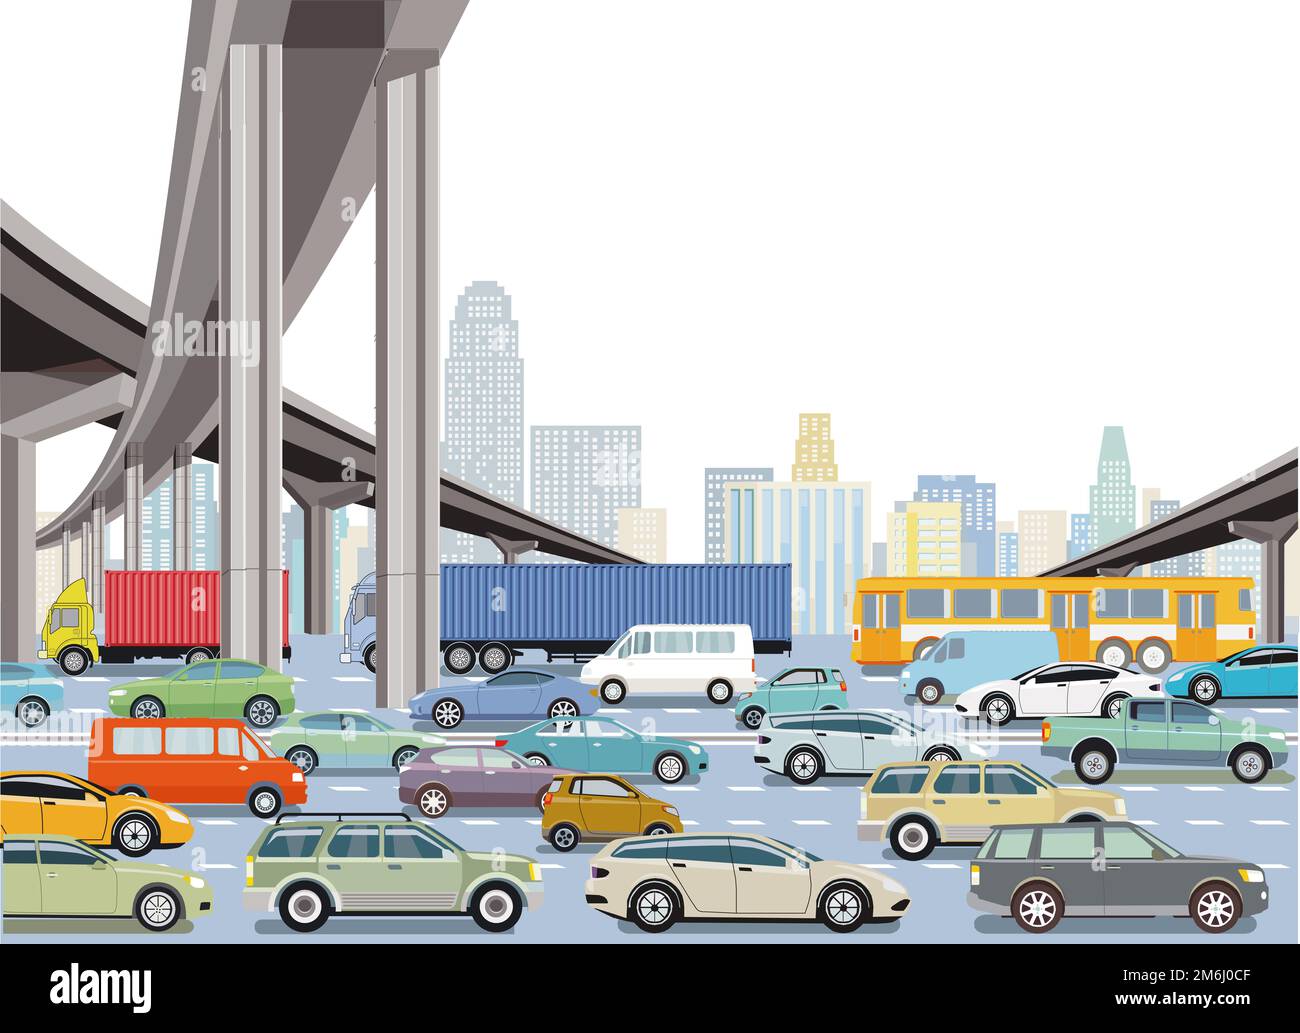 Highway in a big city with trucks and passenger cars, illustration Stock Photo